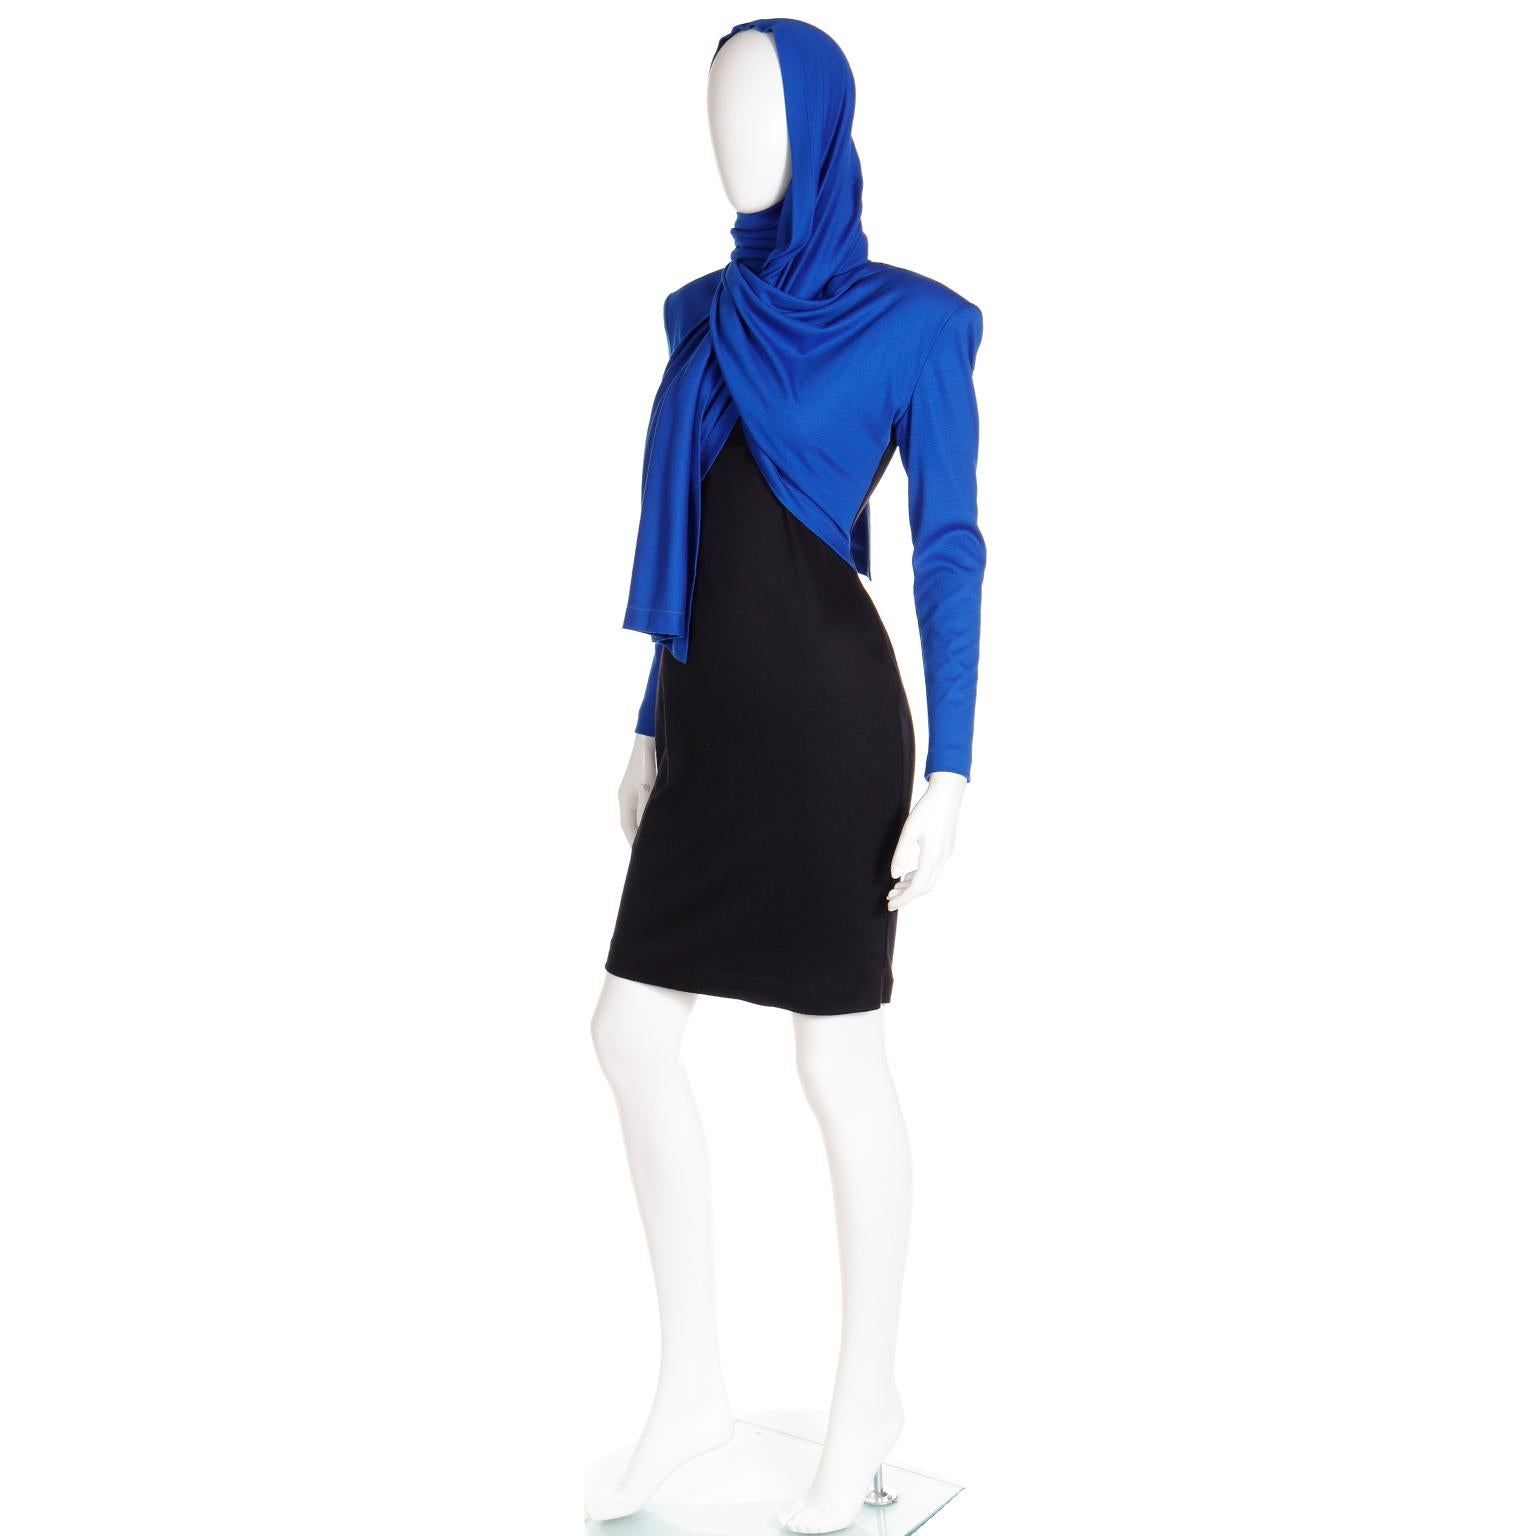 FW 1989 Patrick Kelly Runway Dress in Blue & Black Knit with Head Scarf  For Sale 3